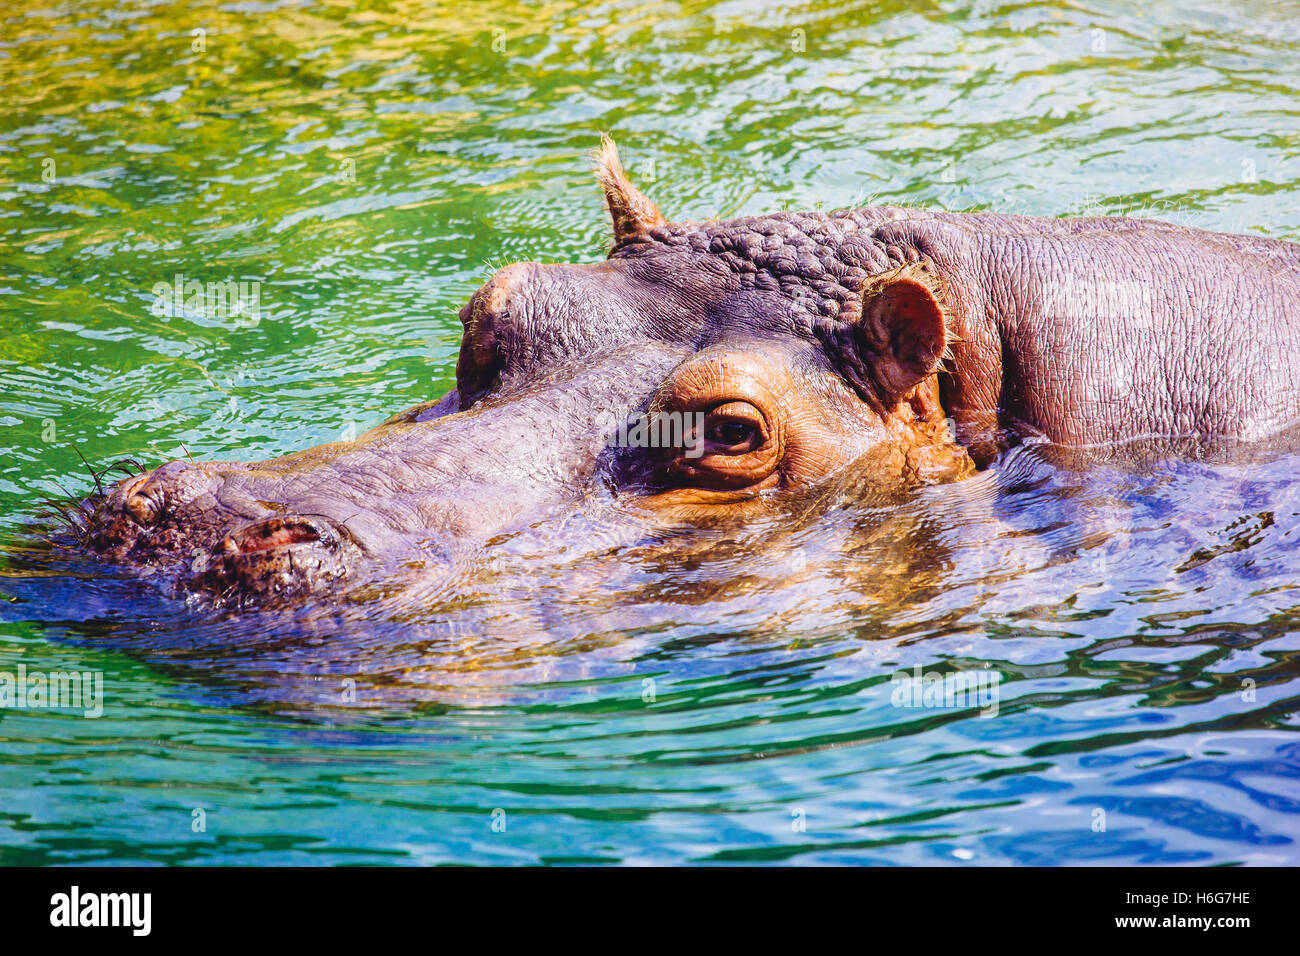 The head of a hippo coming out of the water in which the animal is submerged. Stock Photo